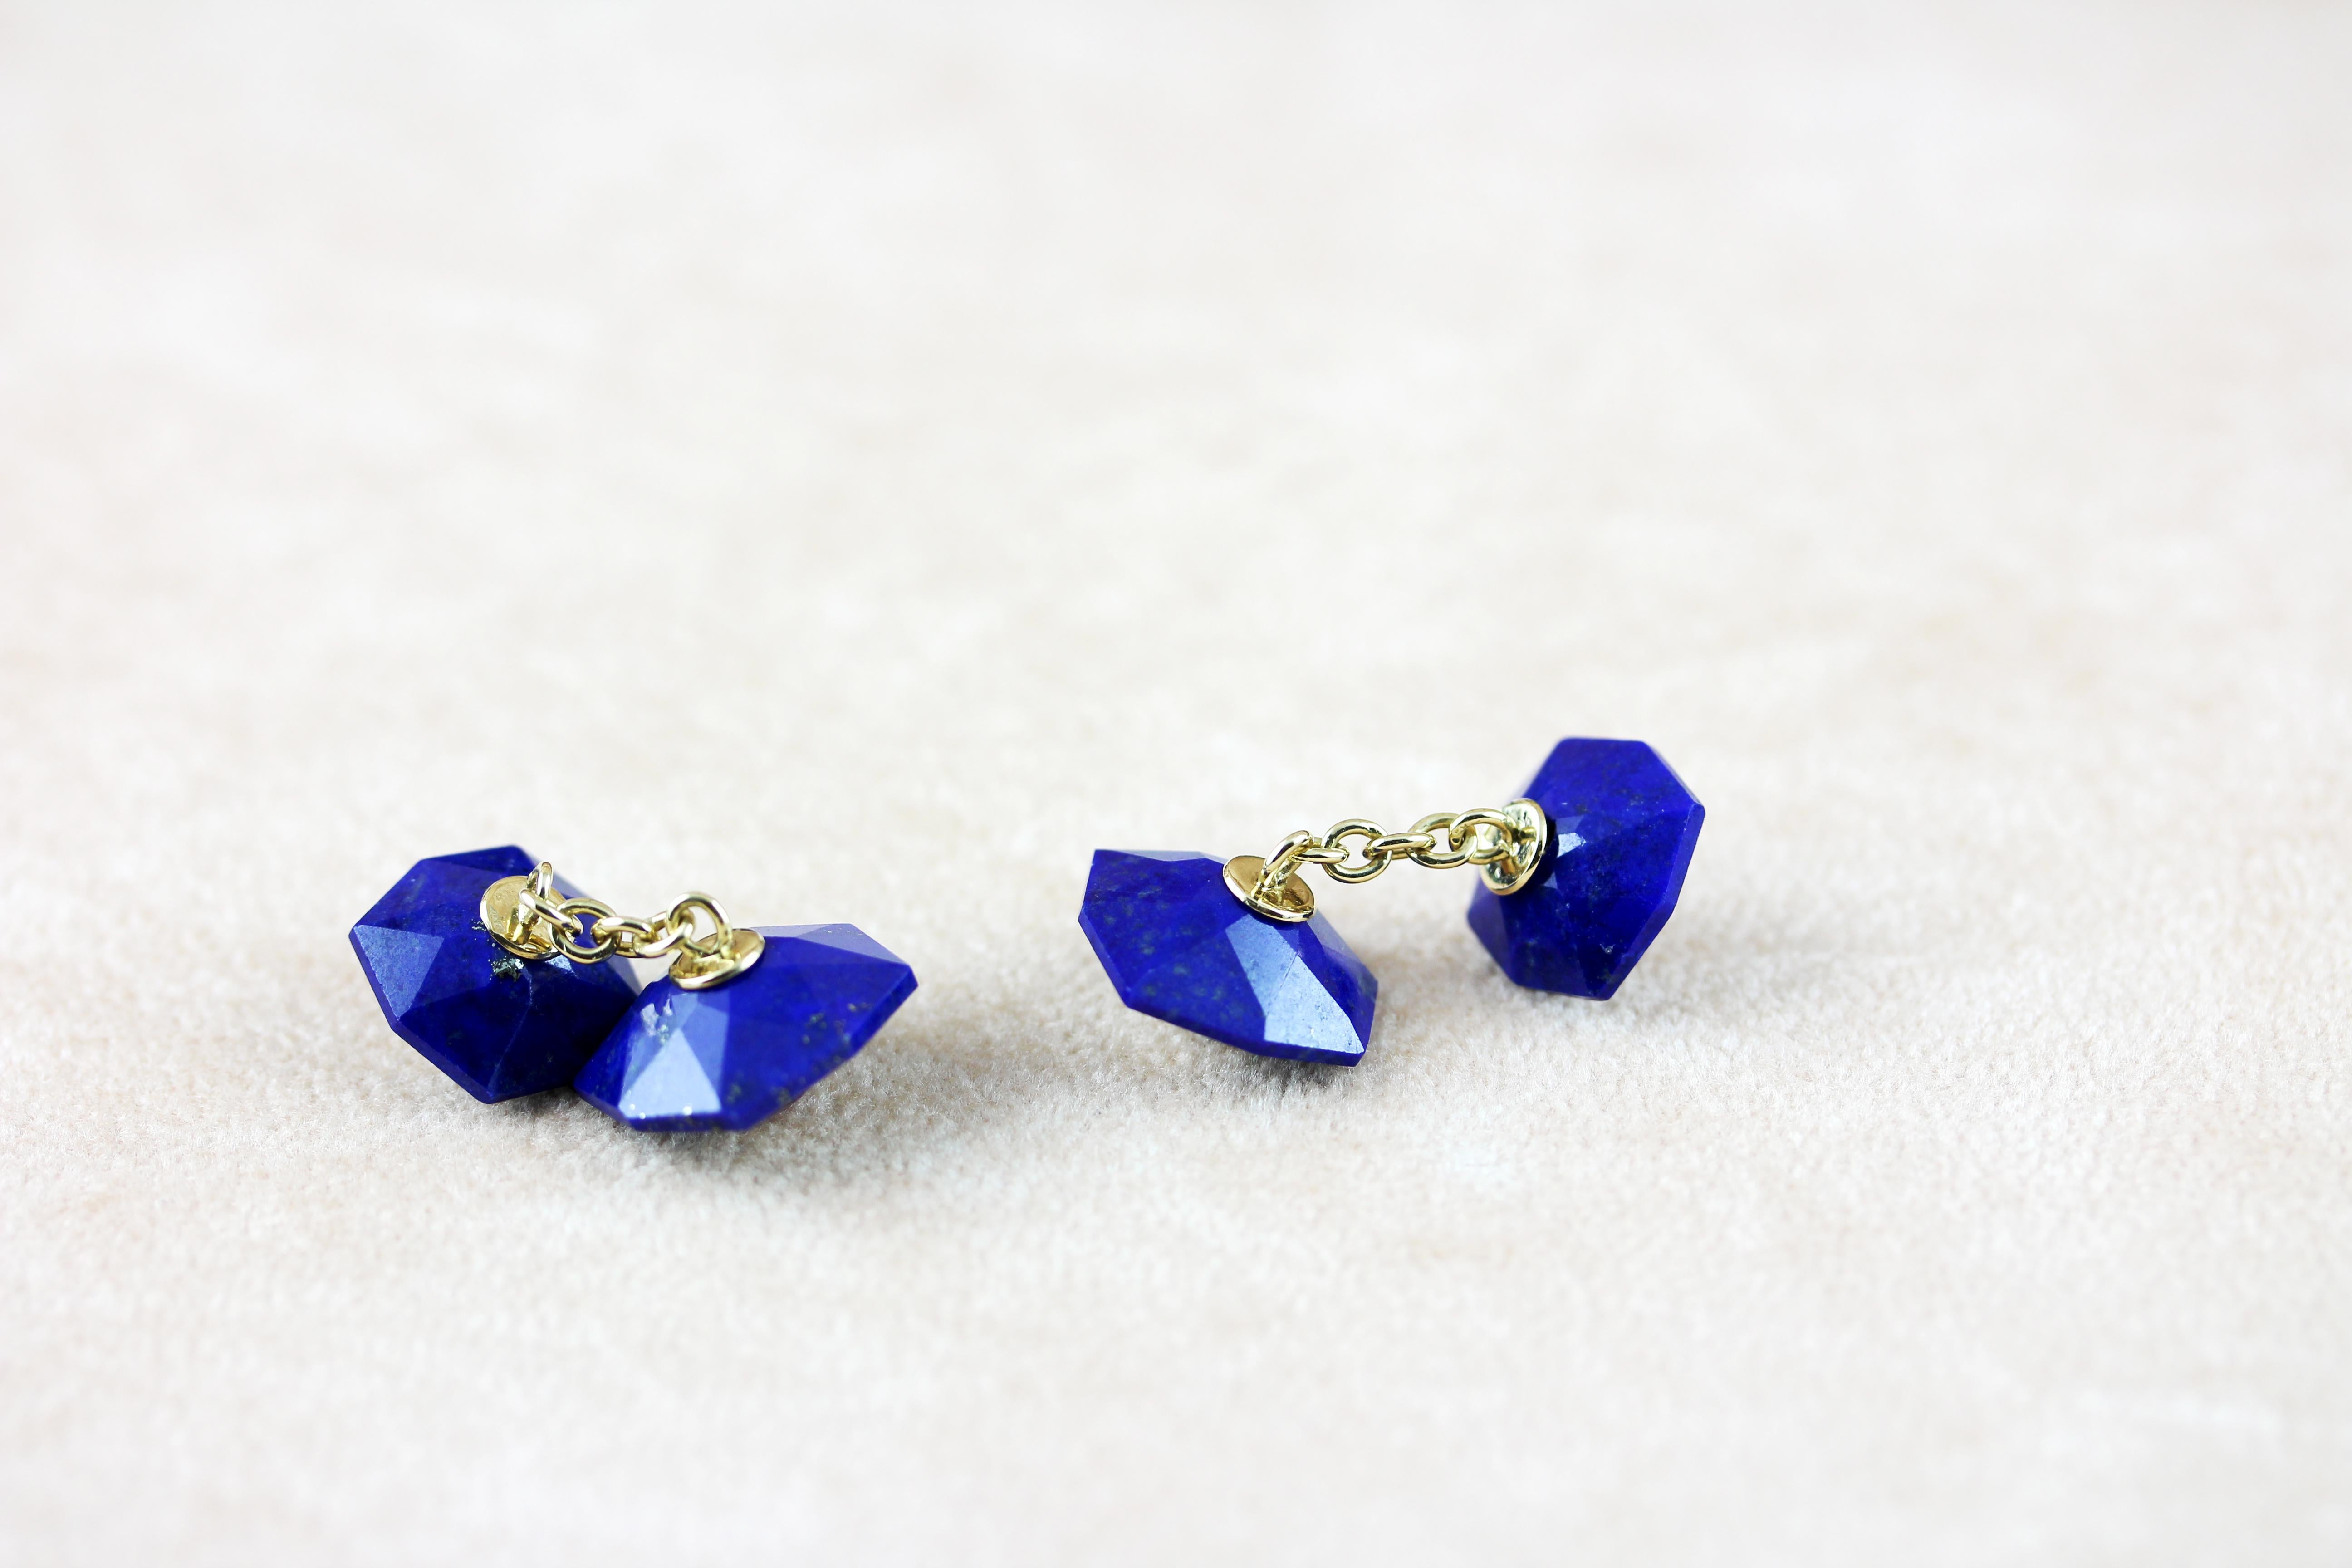 The deep blue shade of the lapis lazuli gives at this pair of cufflinks a strong shade that adds a delicate accent to the octagonal, multifaceted silhouette of both front face and toggle. 
Each element is adorned in the center with a mother of pearl